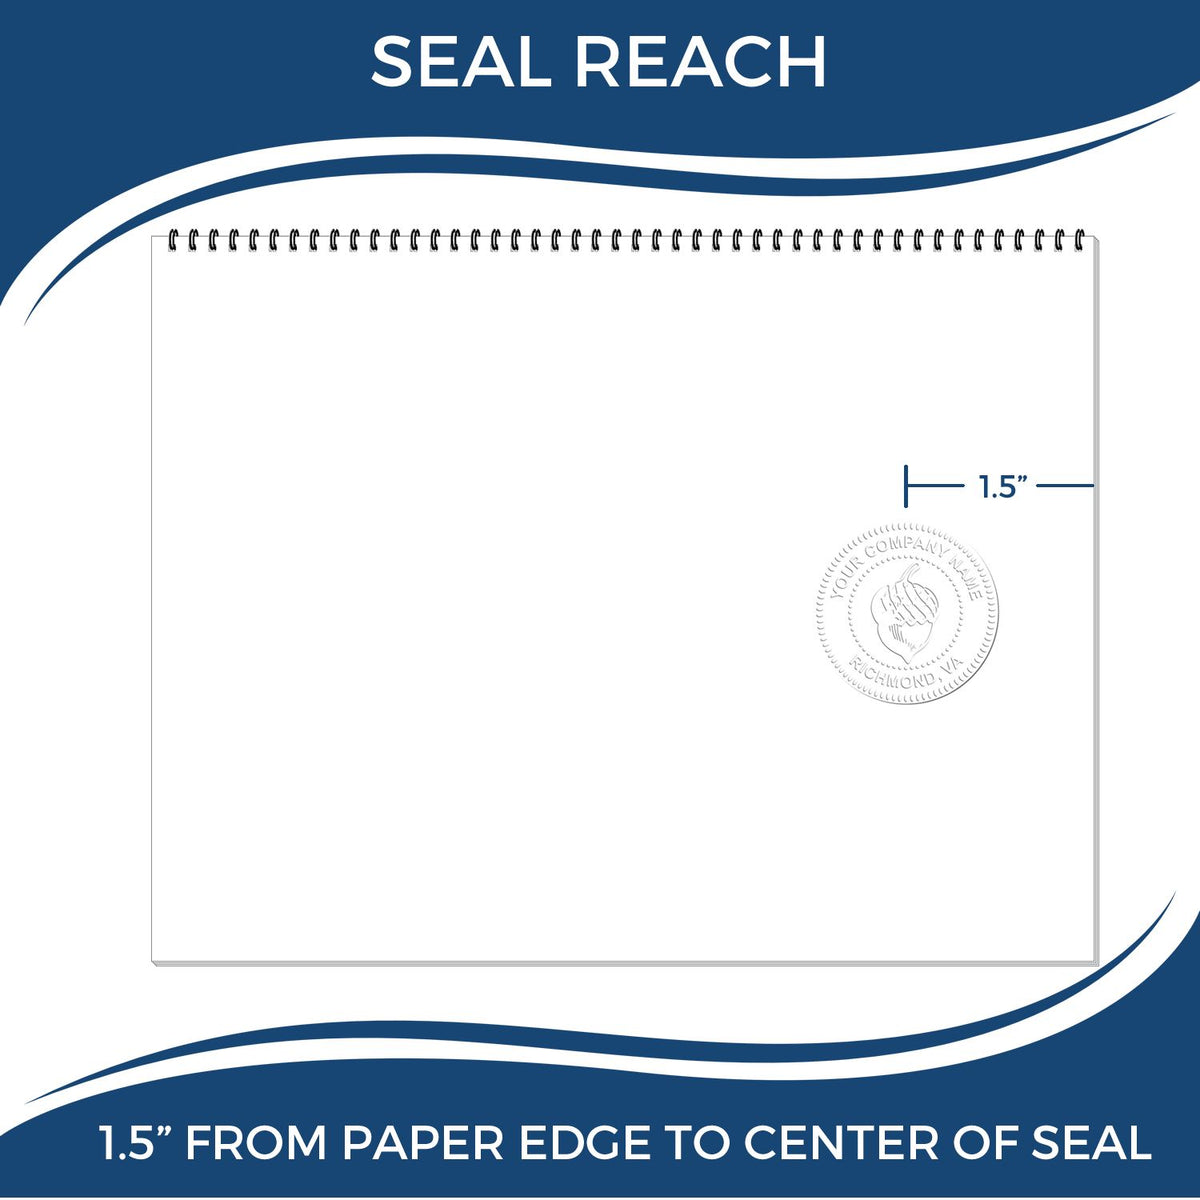 An infographic showing the seal reach which is represented by a ruler and a miniature seal image of the State of New Hampshire Architectural Seal Embosser